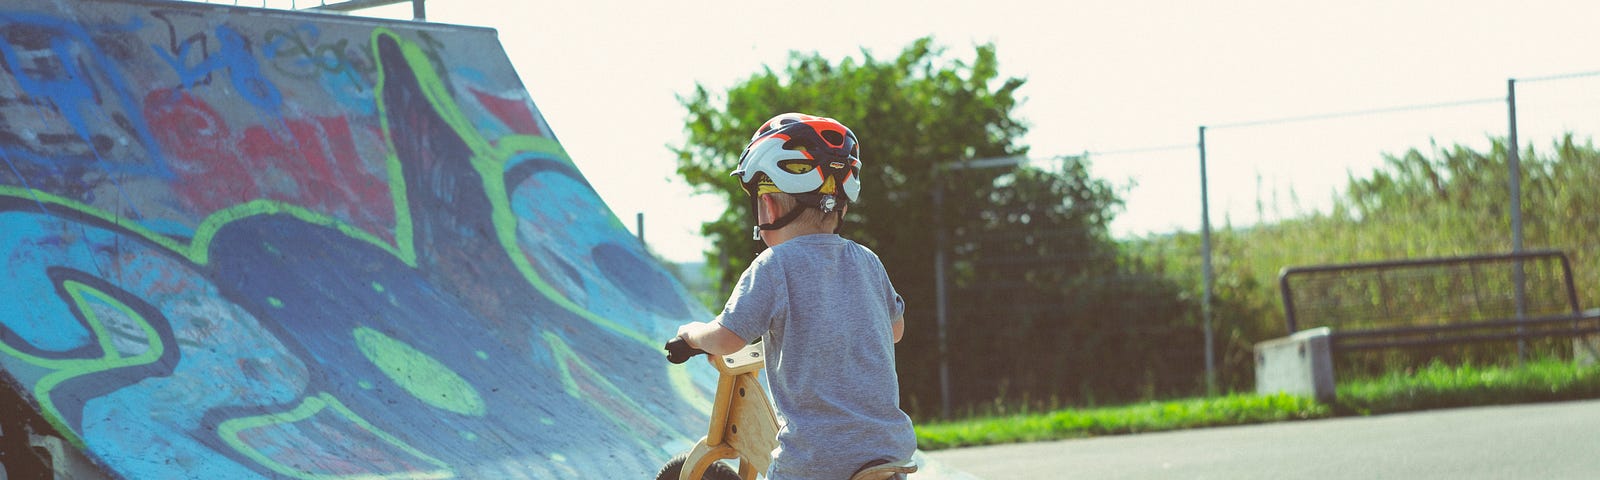 A little boy considering whether he should ride up a ramp on his bike.